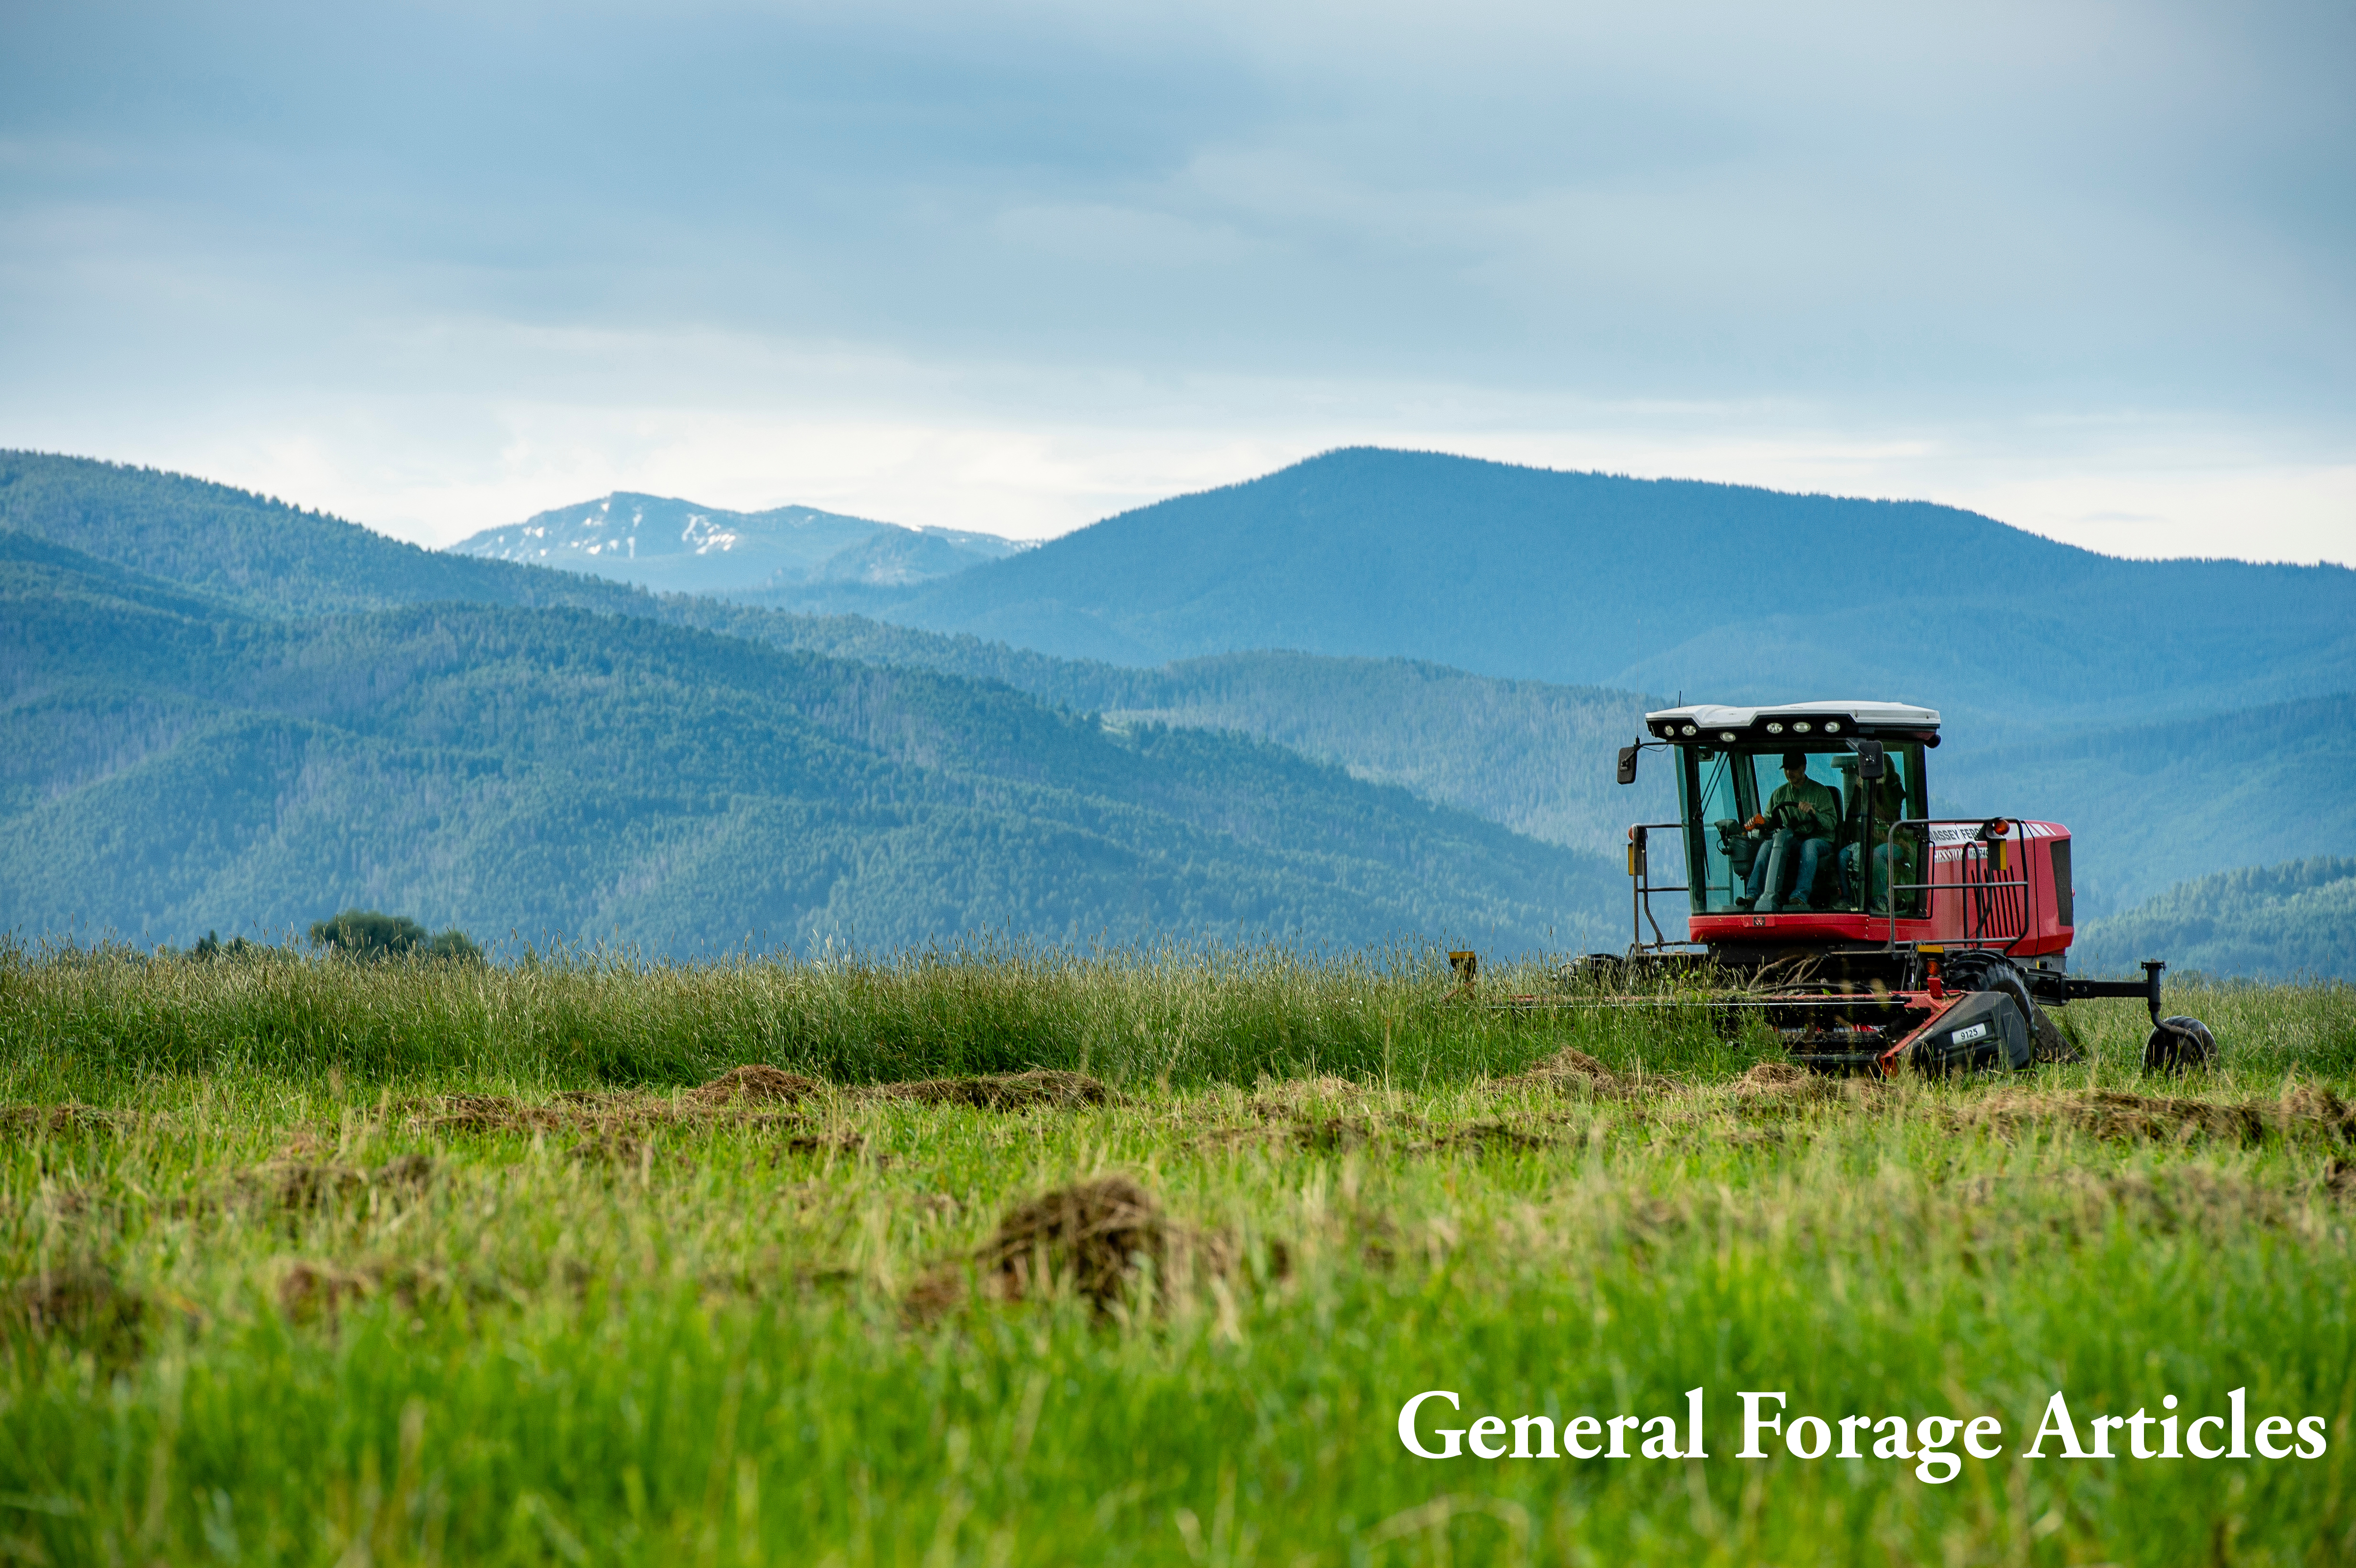 General Forage Articles page